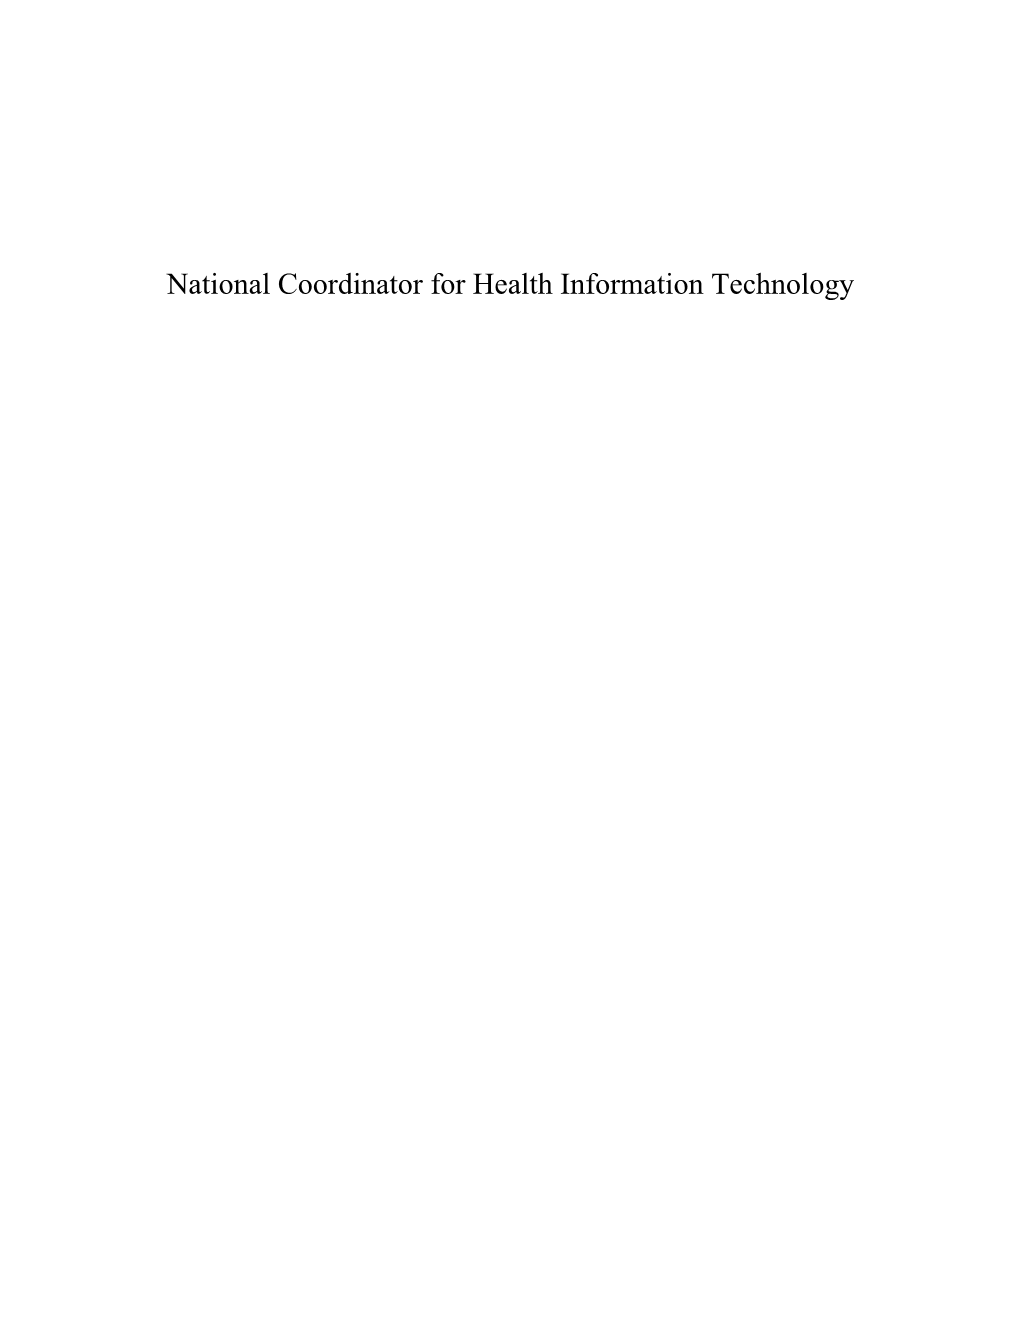 Fiscal Year 2019 Office of the National Coordinator for Health Information